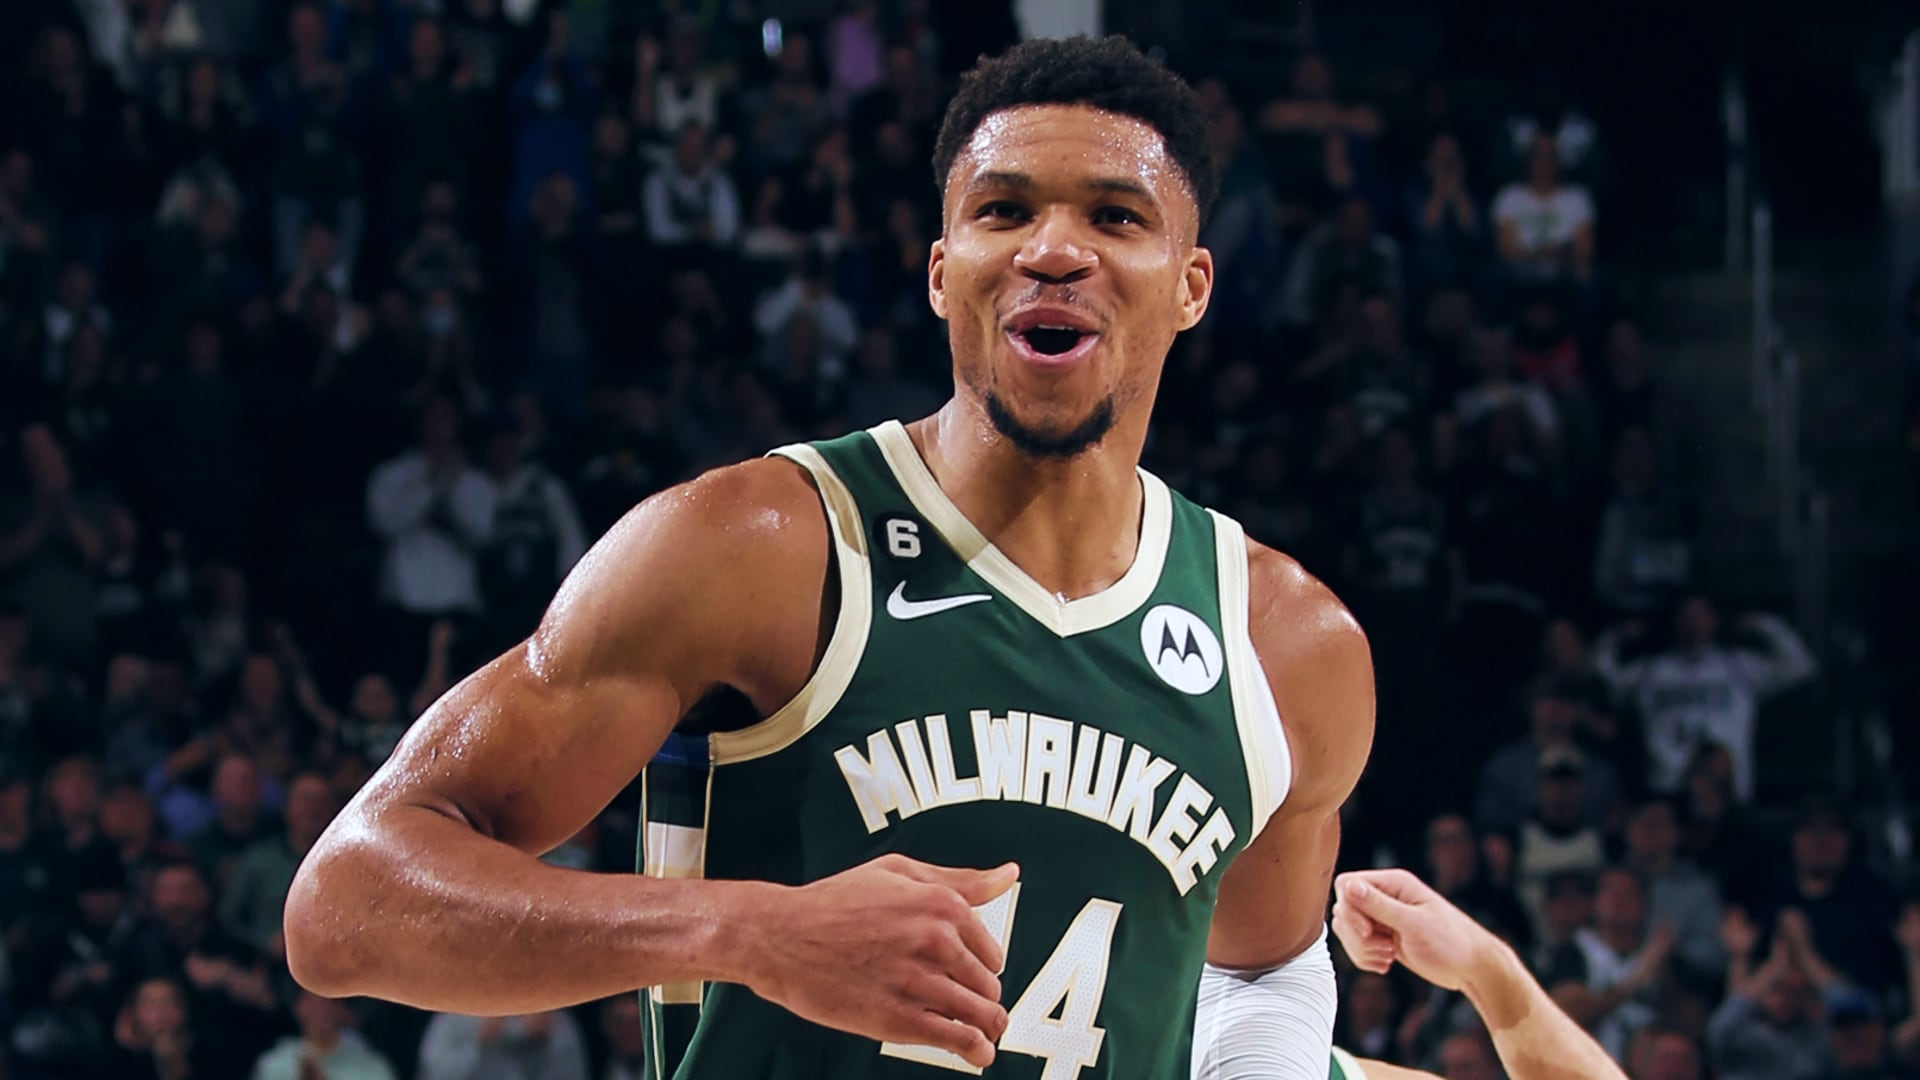 2023 All Star Game: Giannis Antetokounmpo Announced As Eastern Conference Team Captain